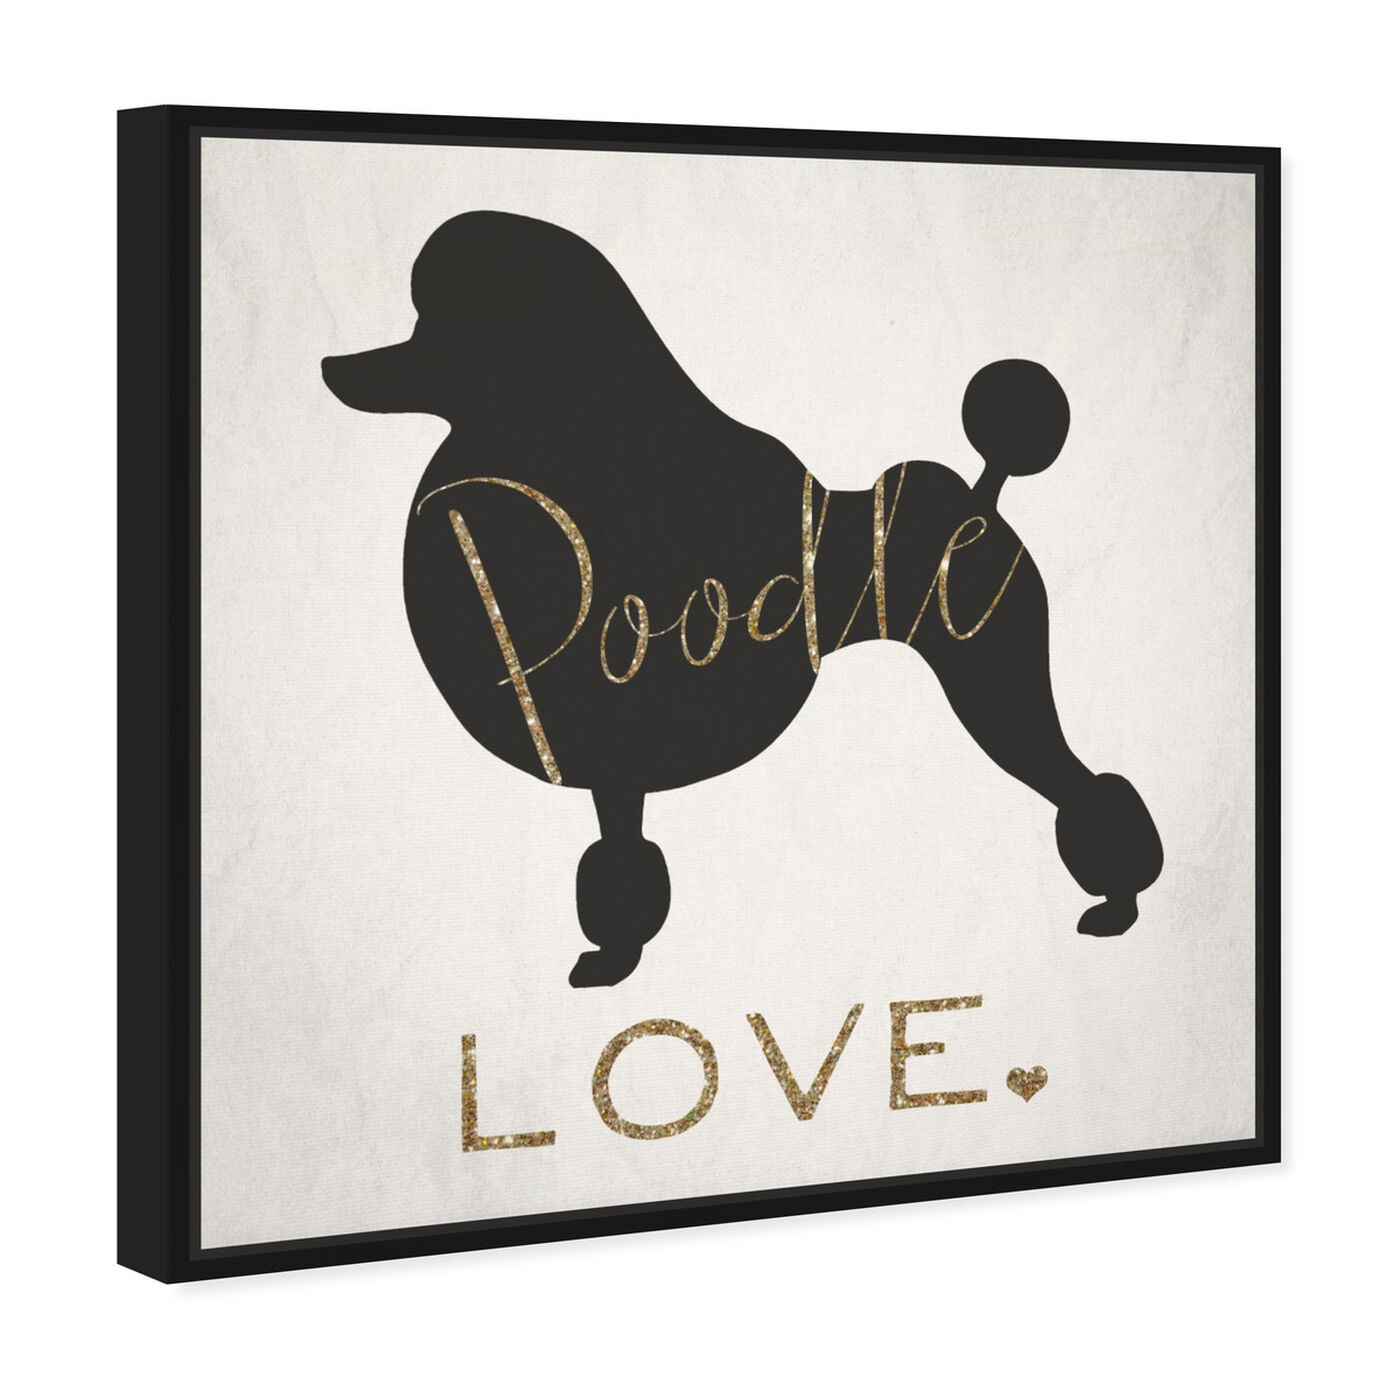 Angled view of Poodle Love featuring animals and dogs and puppies art.